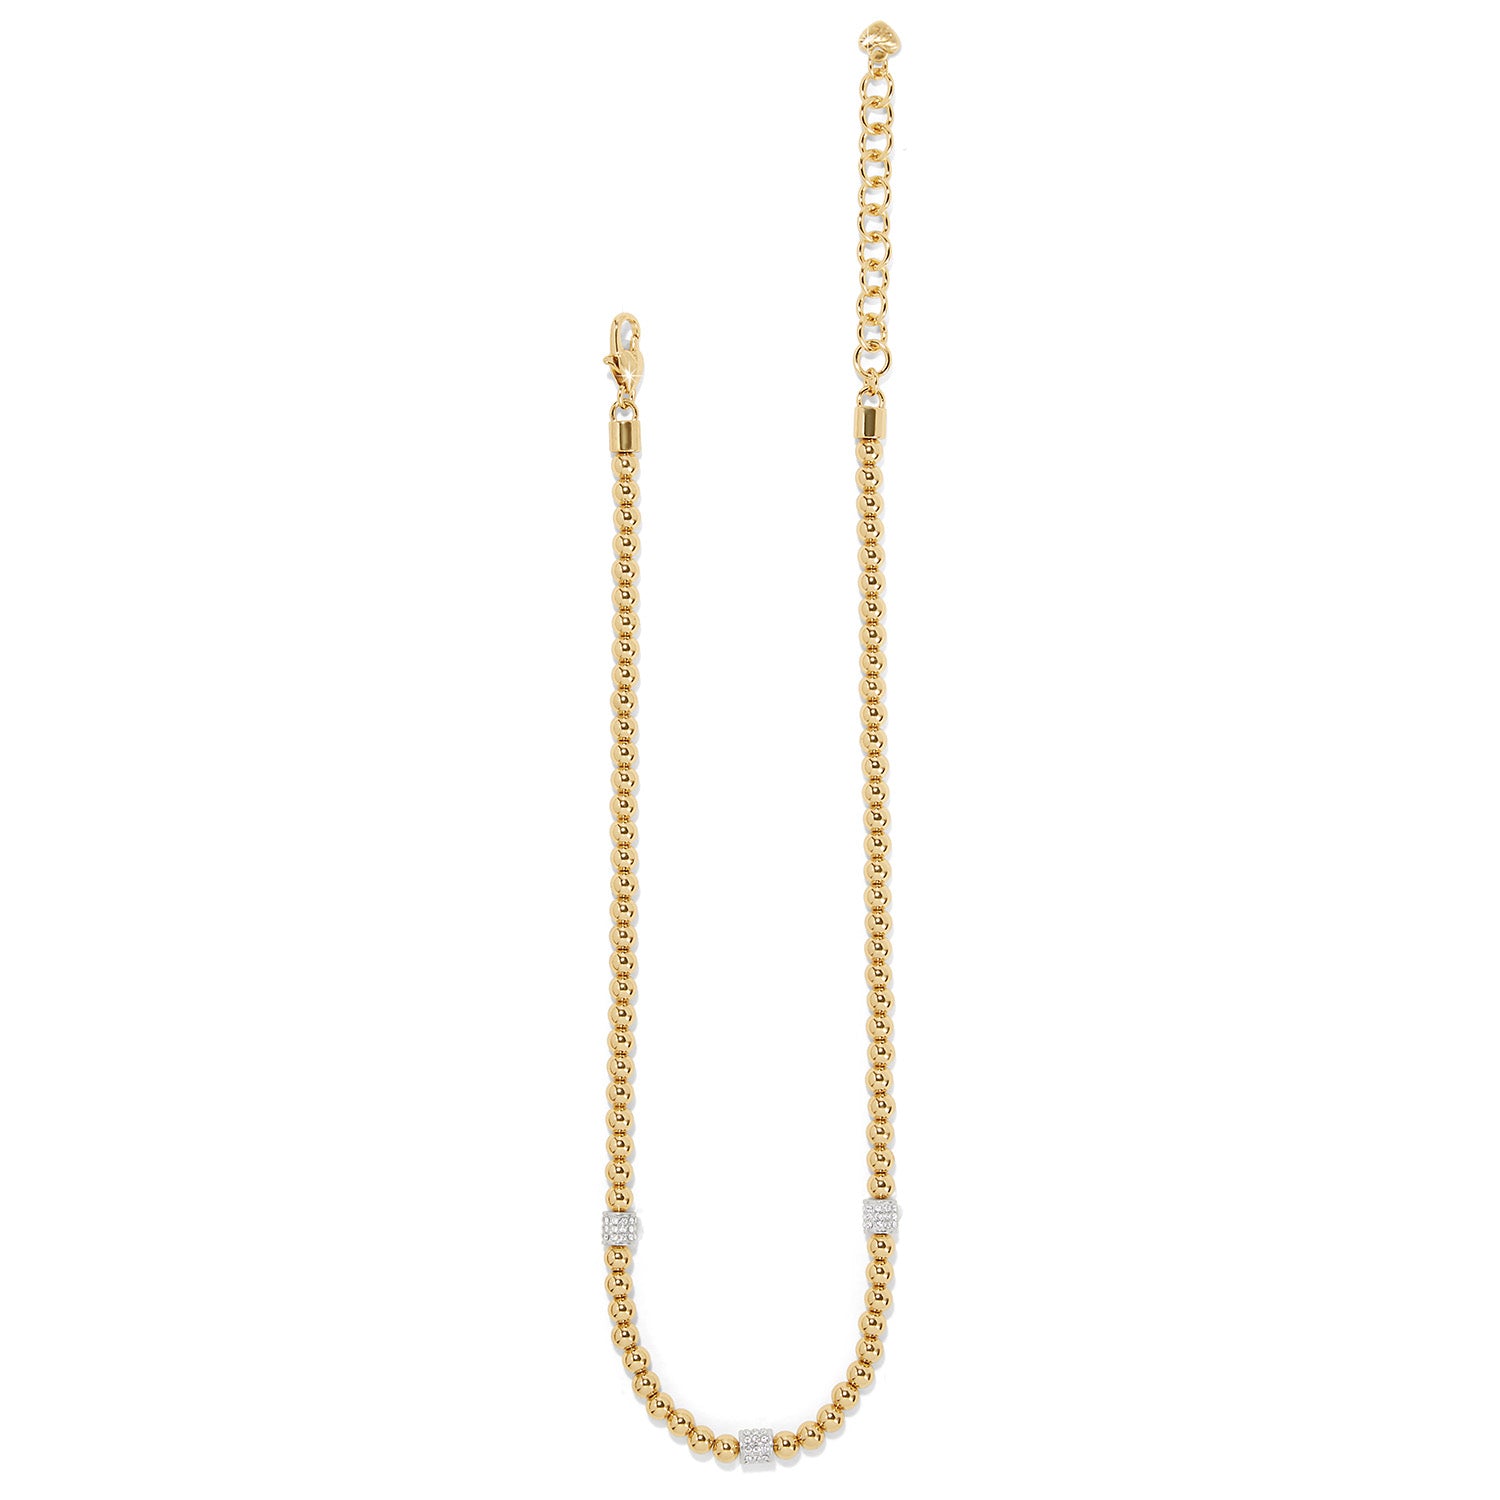 Meridian Petite Beads Station Necklace